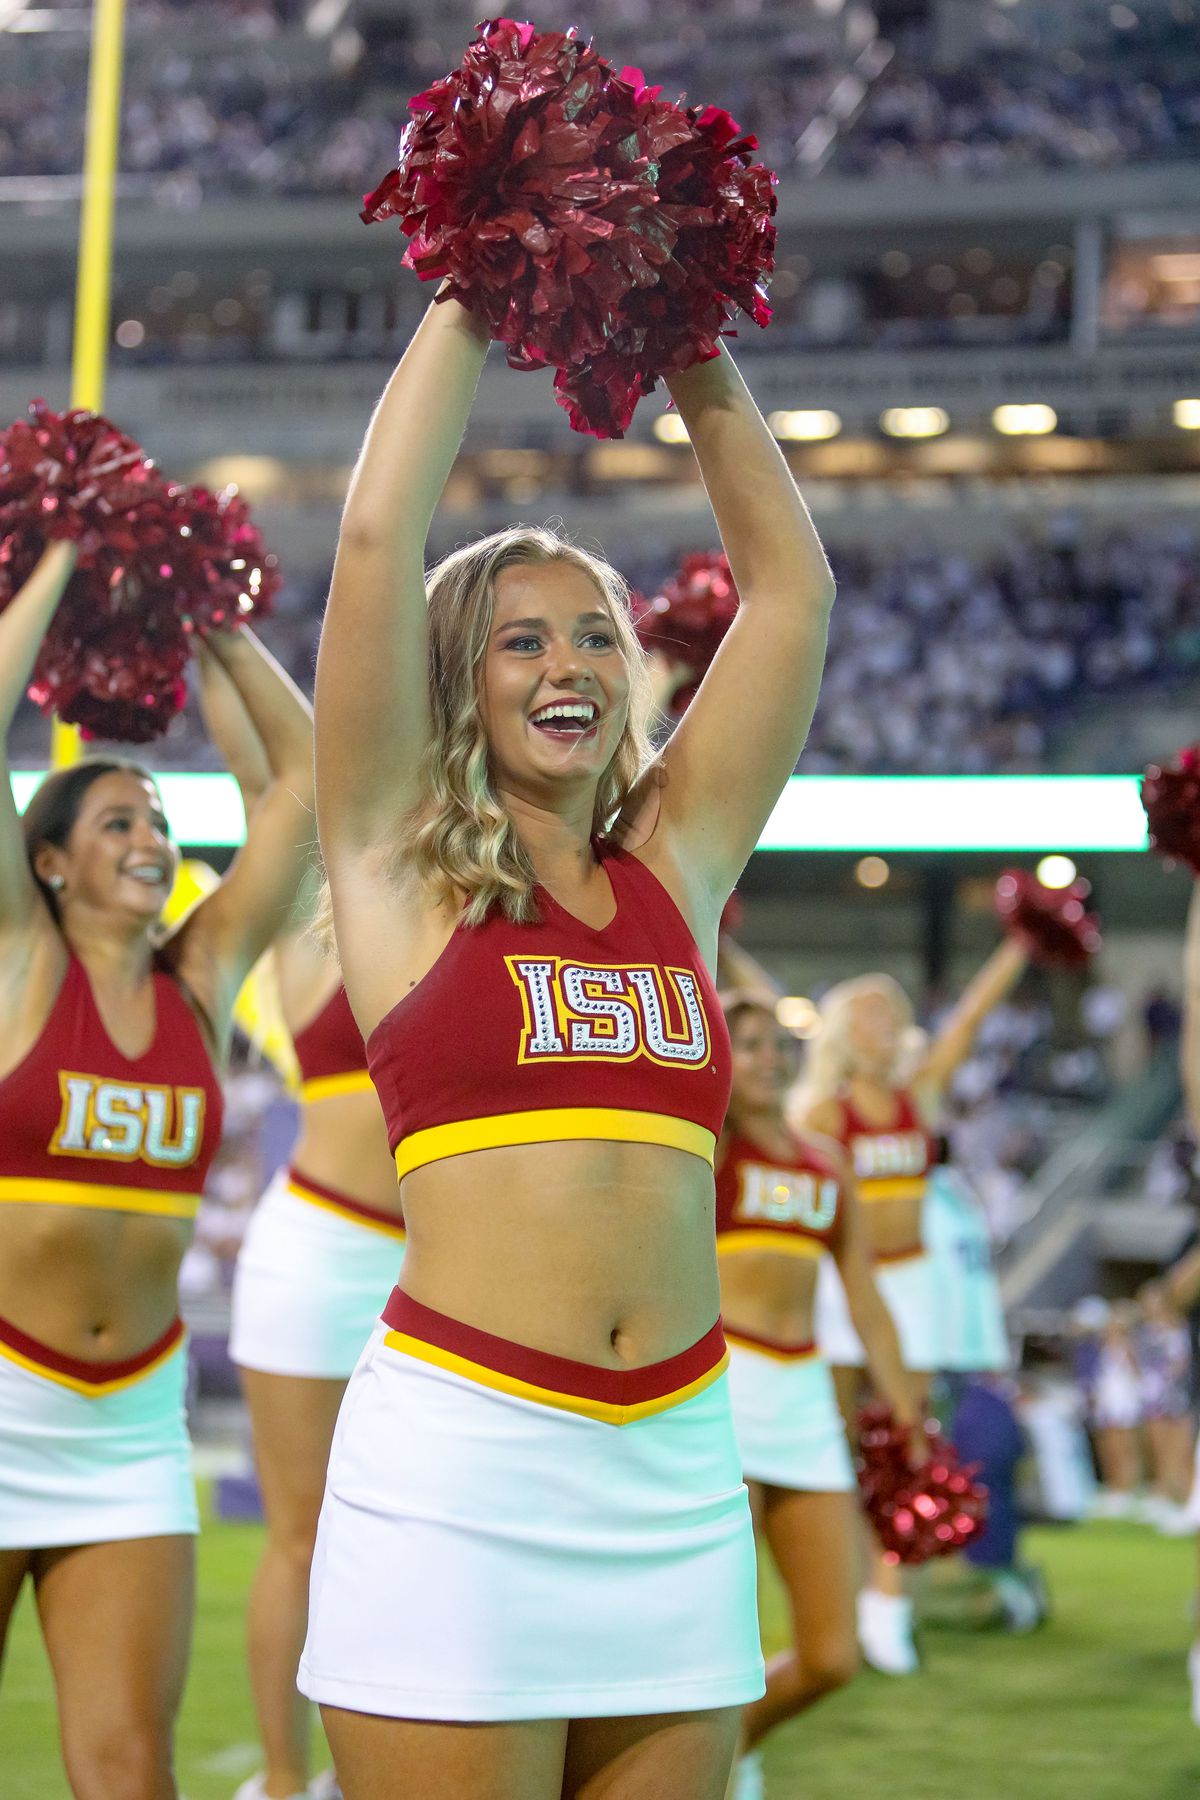 <p zoompage-fontsize="15" style="">COLLEGE FOOTBALL: SEP 29 Iowa State at TCU